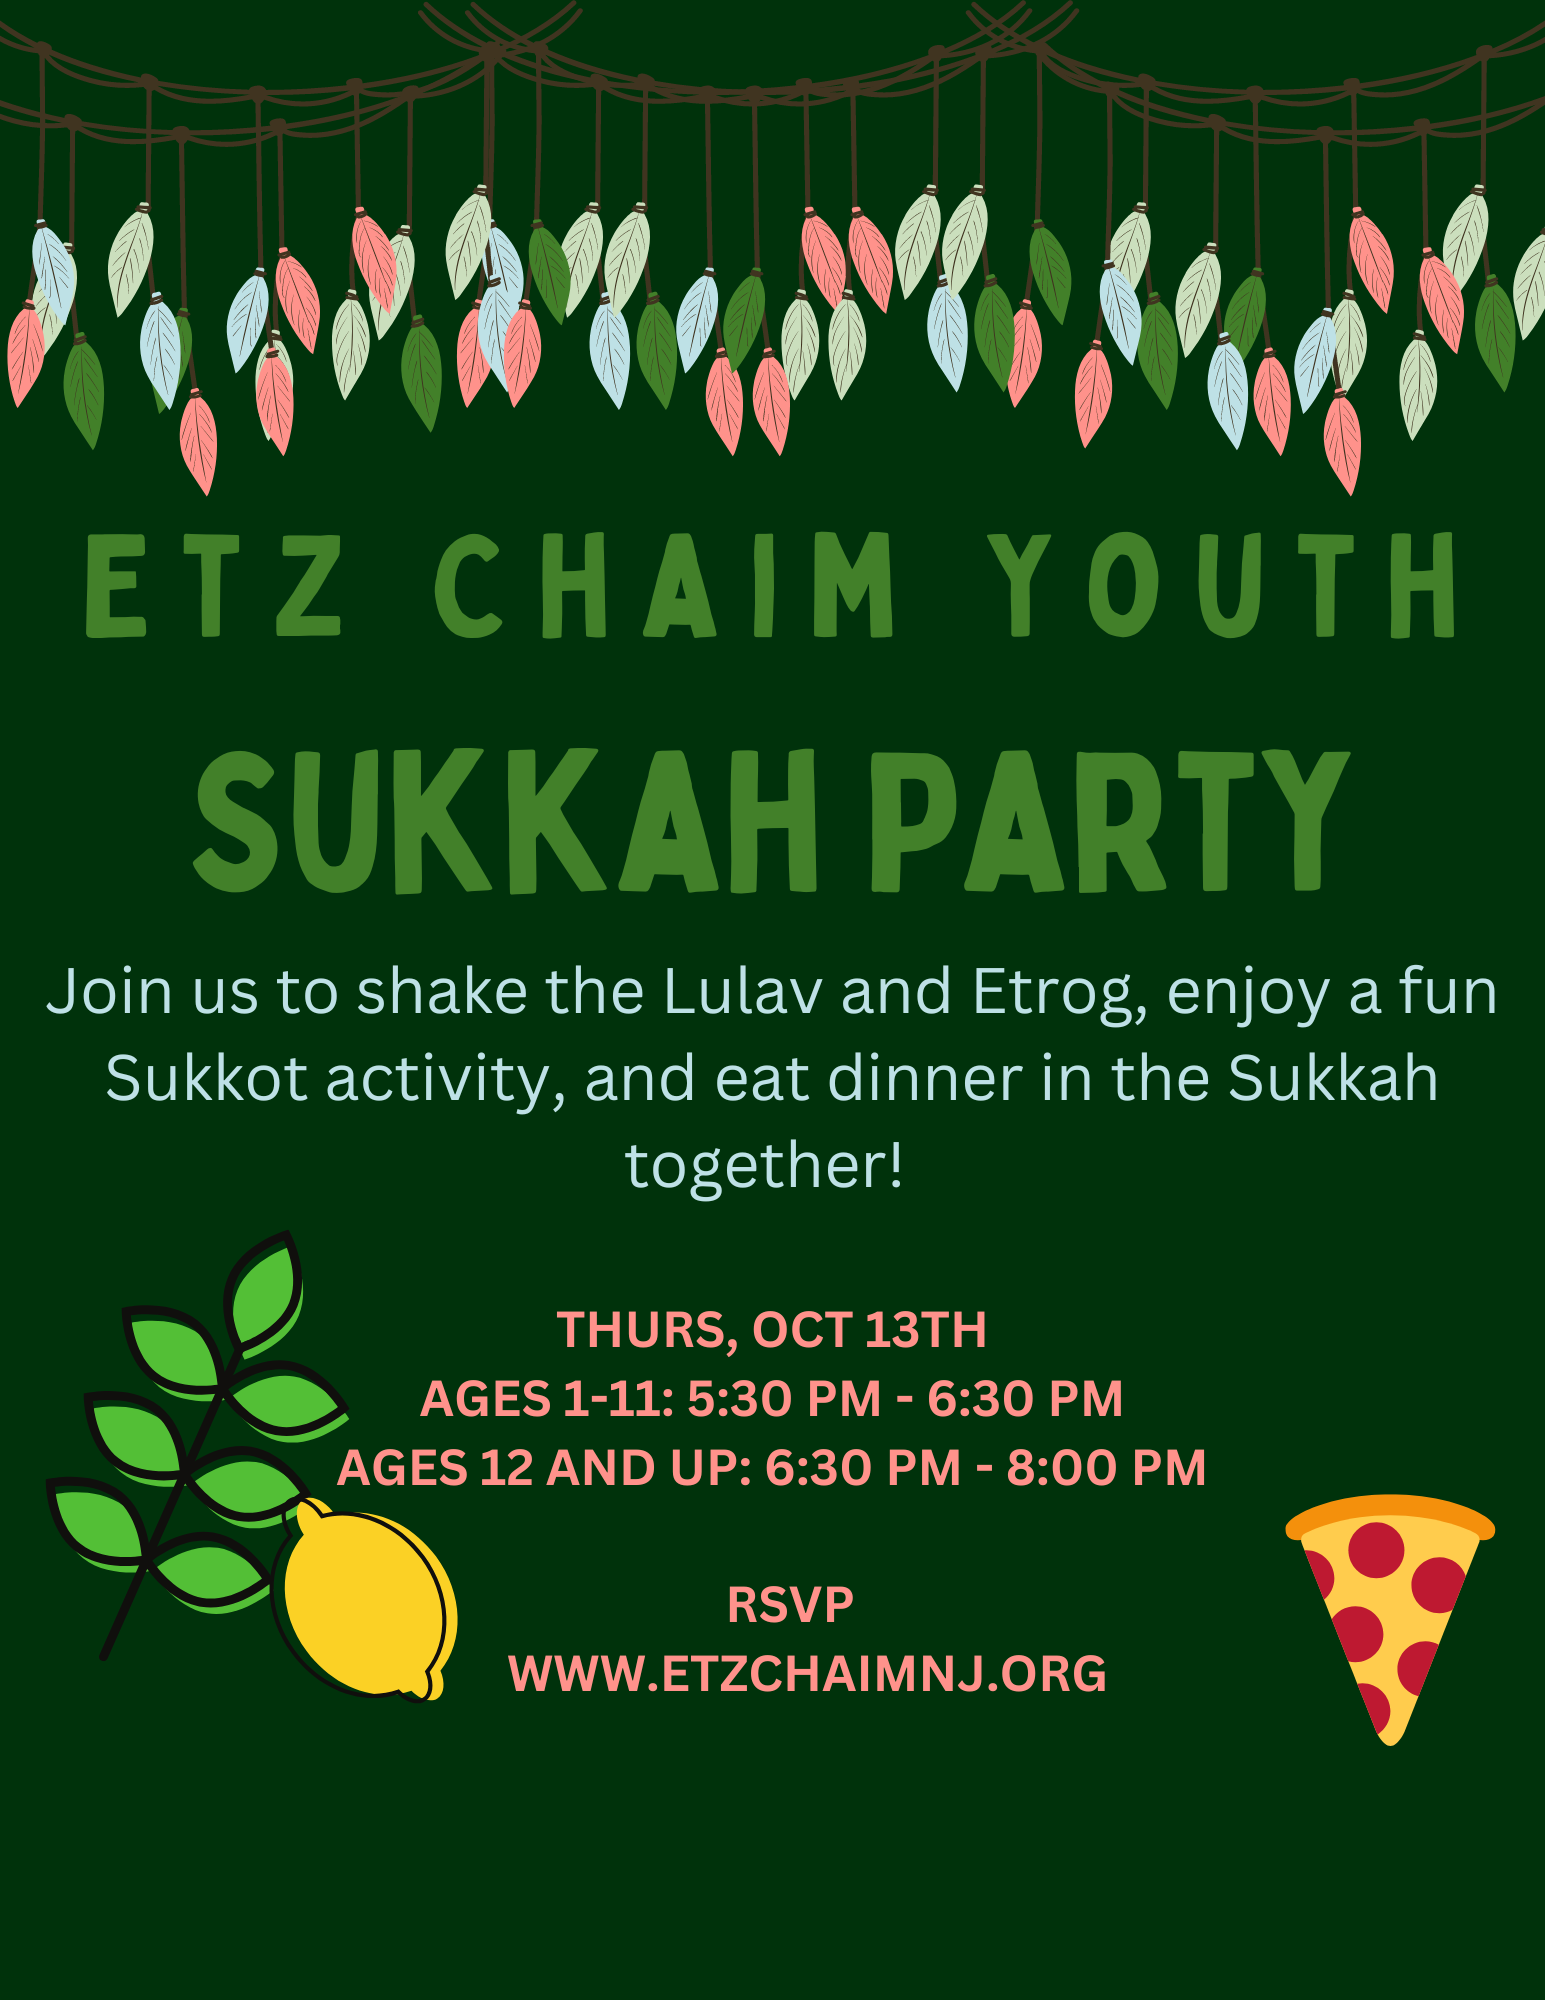 YOUTH: Sukkah Party!